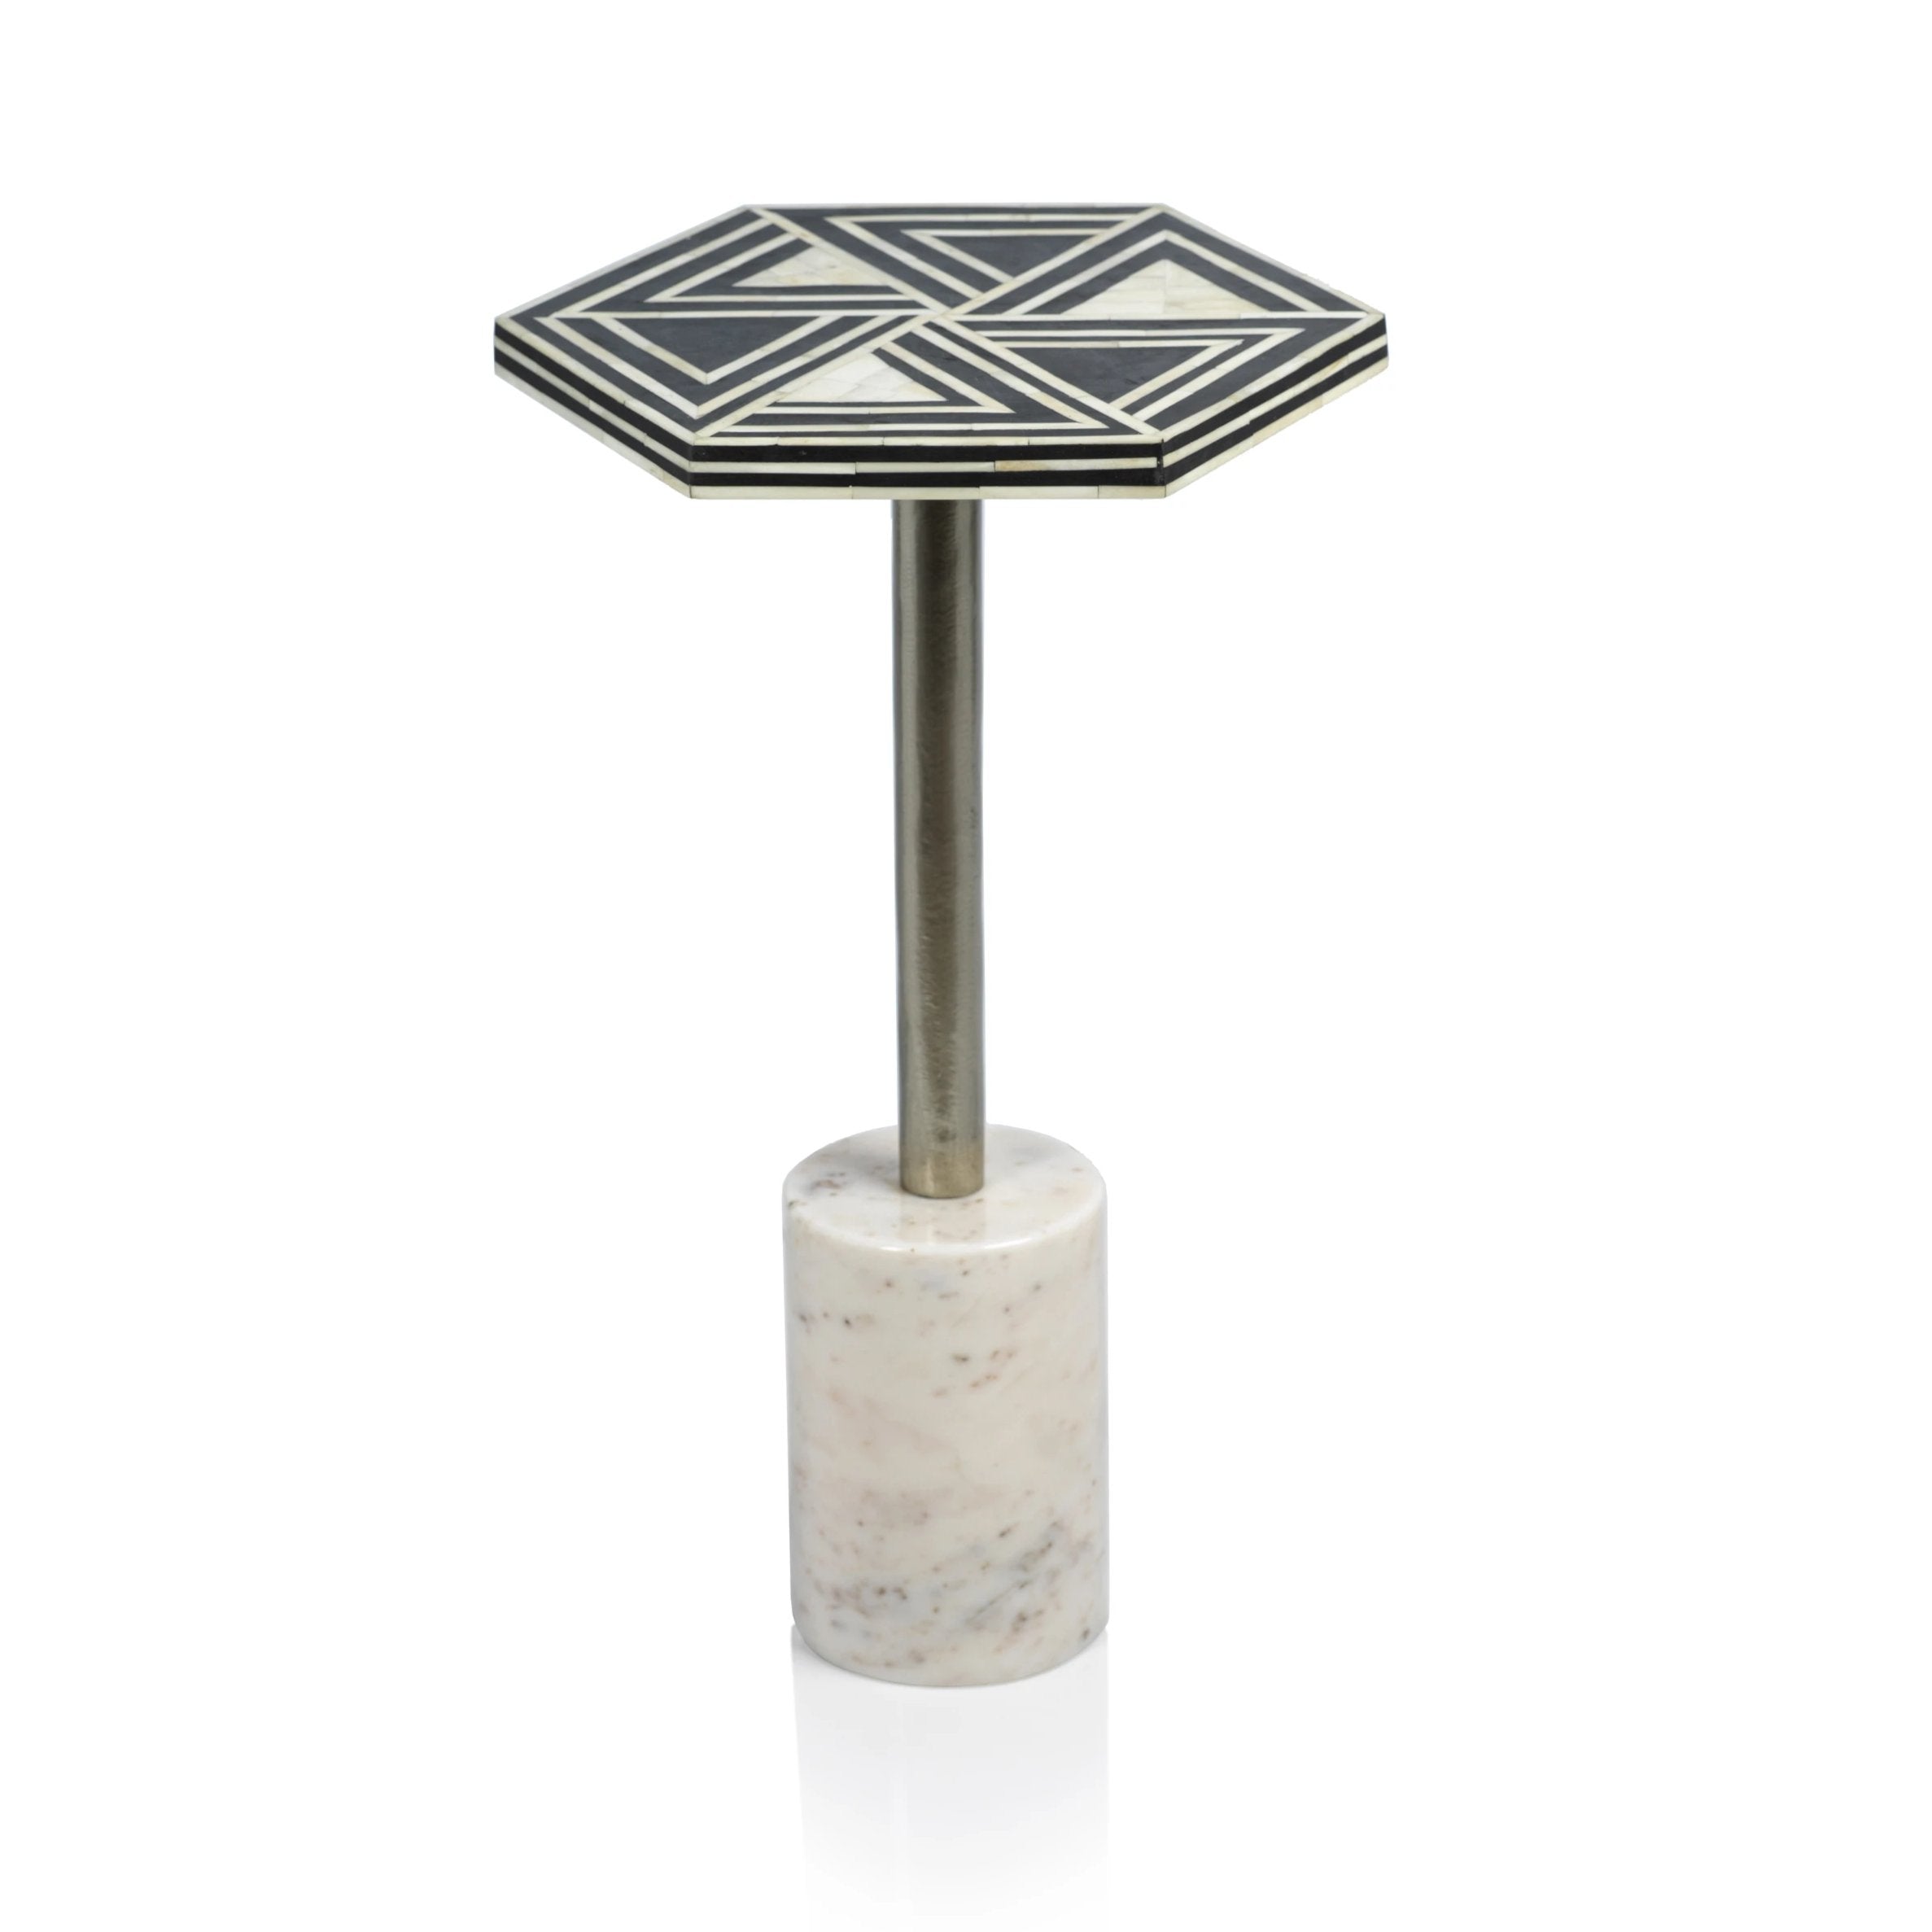 Sultana Hexagon Cocktail Table on Marble Base - CARLYLE AVENUE